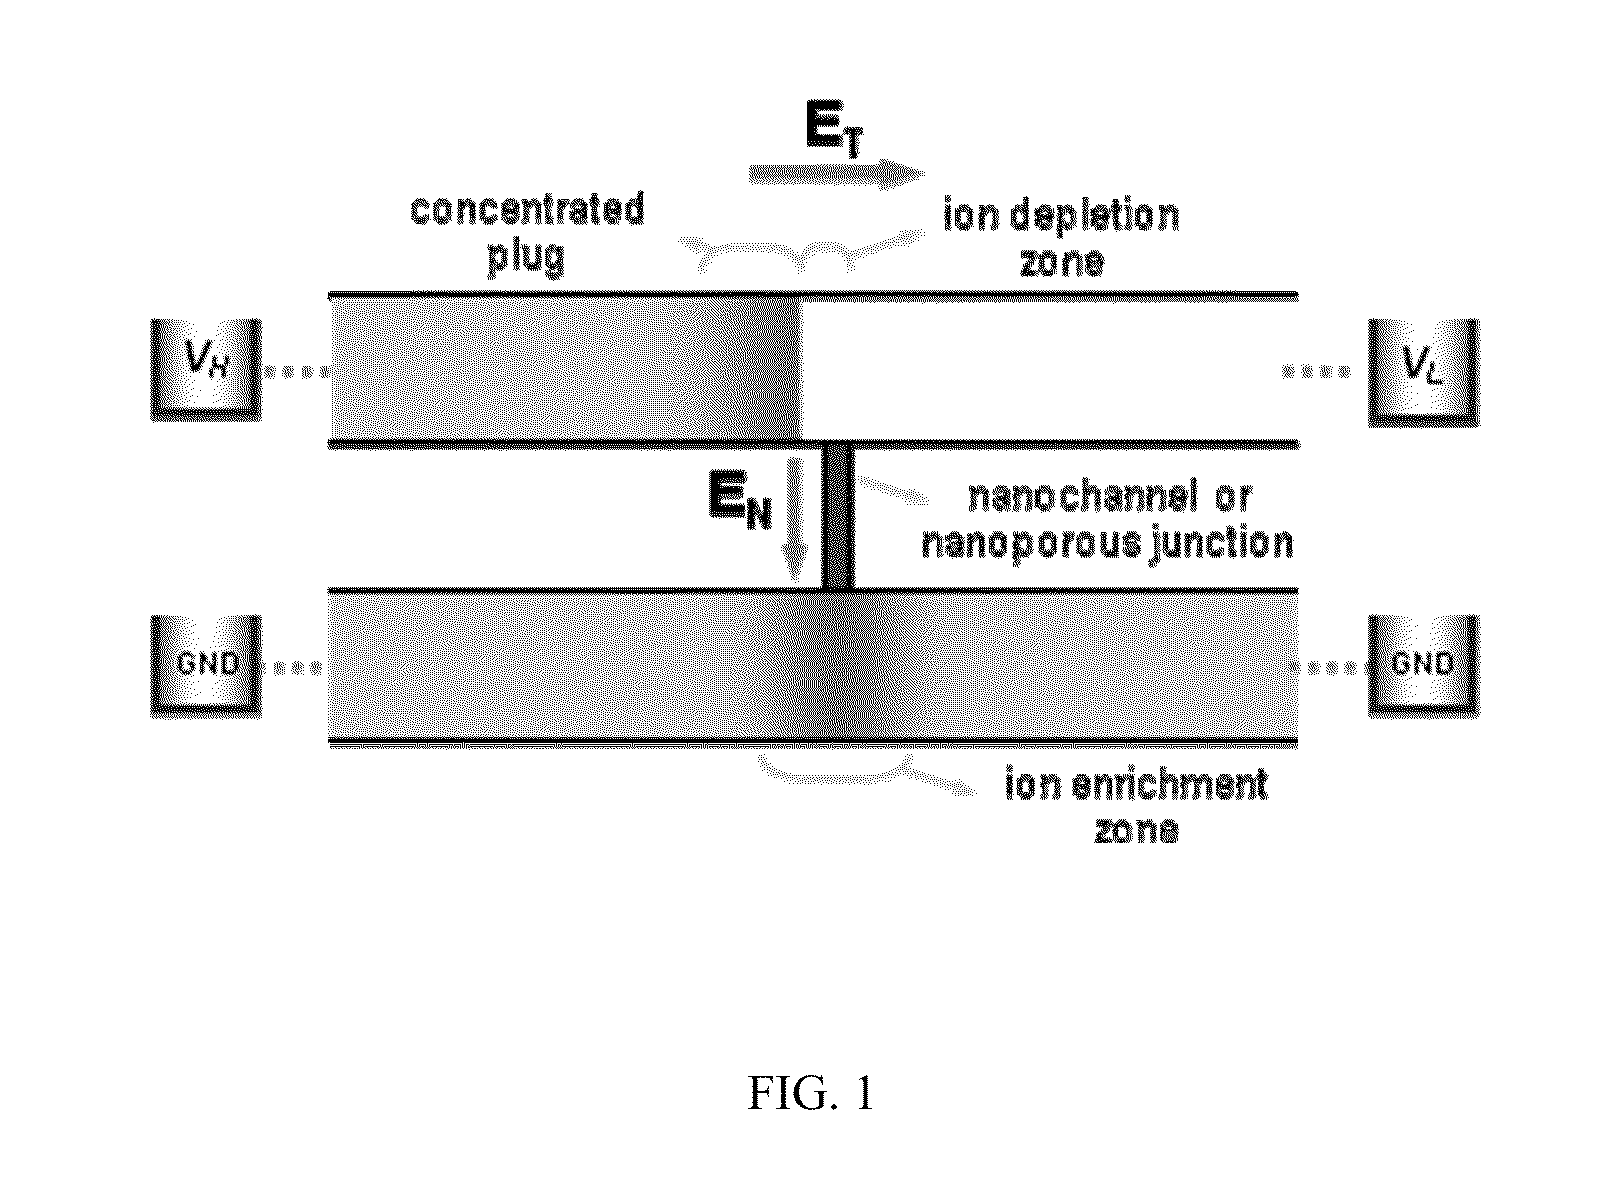 Method for Building Massively-Parallel Preconcentration Device for Multiplexed, High-Throughput Applications